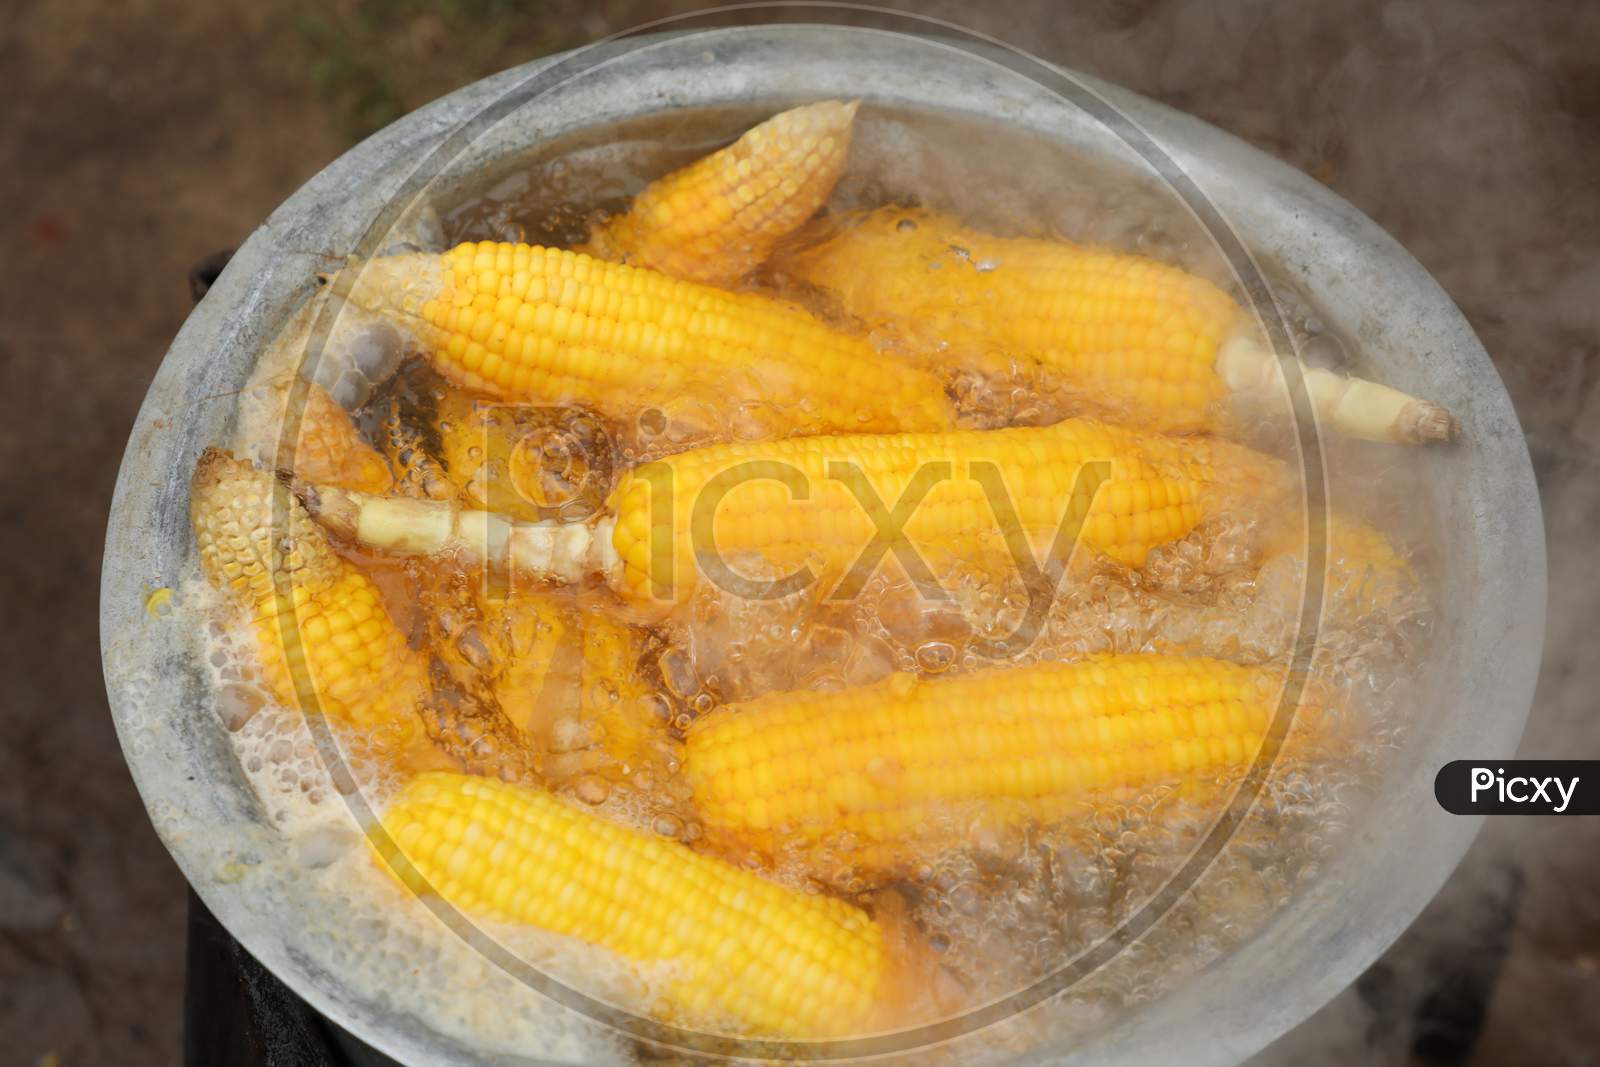 Corn Cobs On The Grill